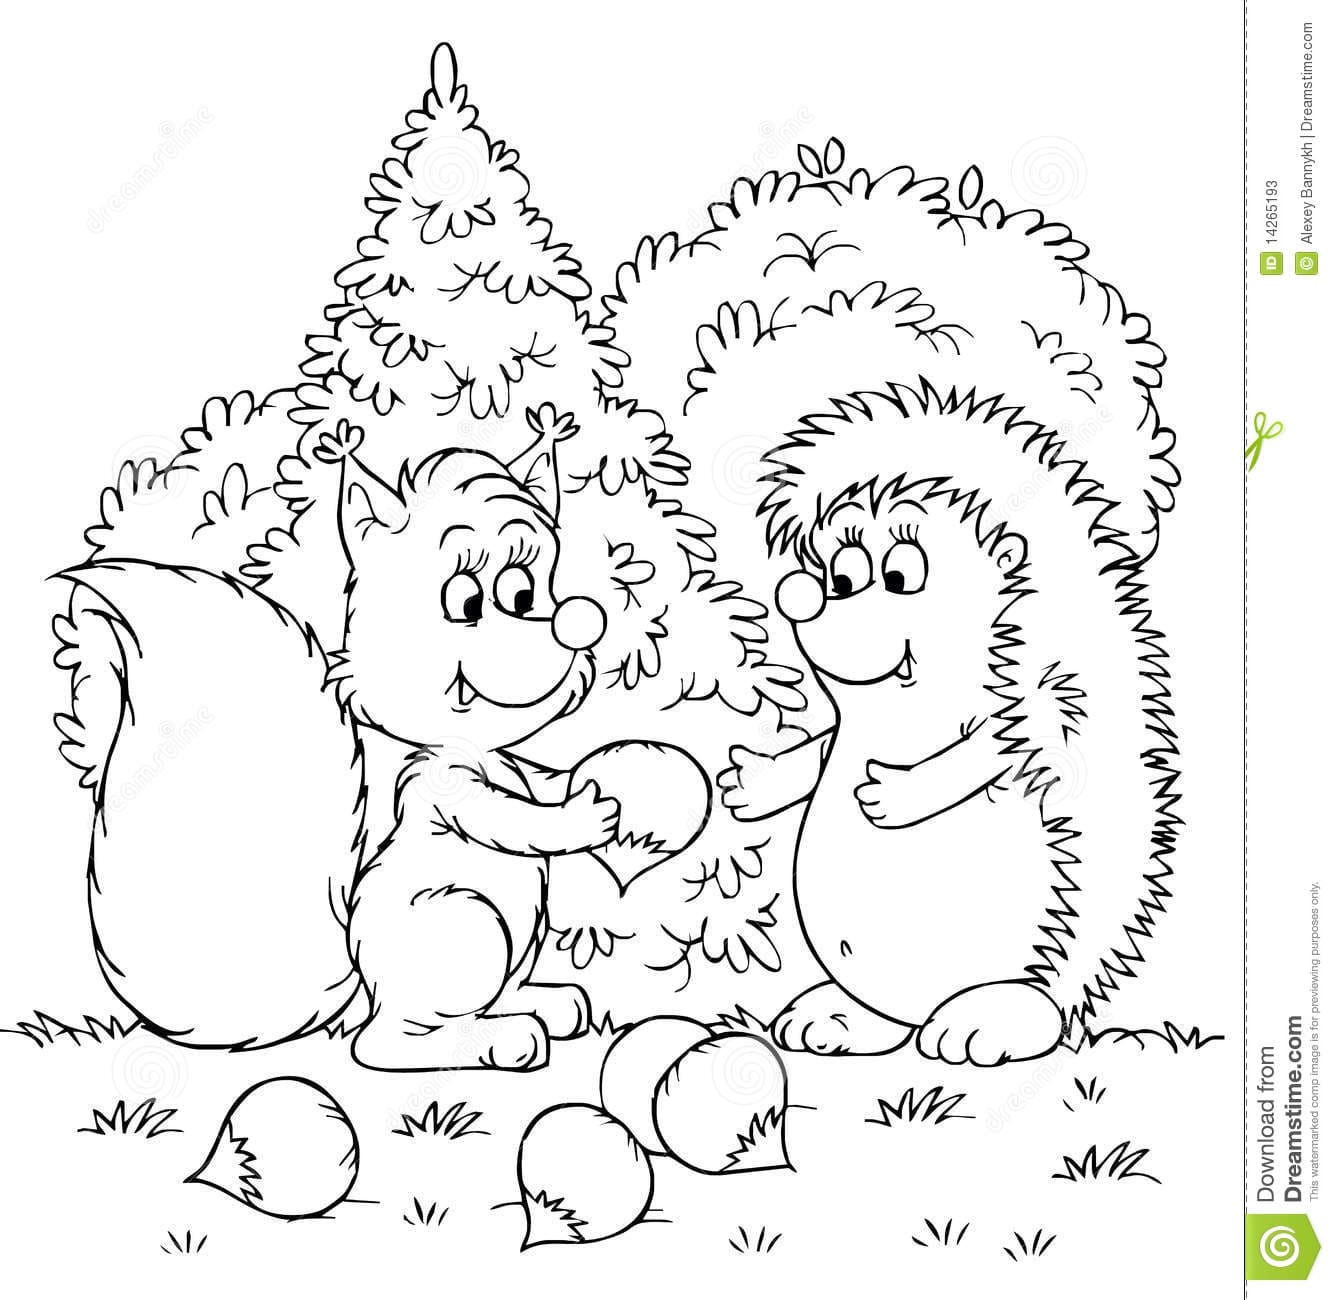 Squirrel And Hedgehog With Nuts